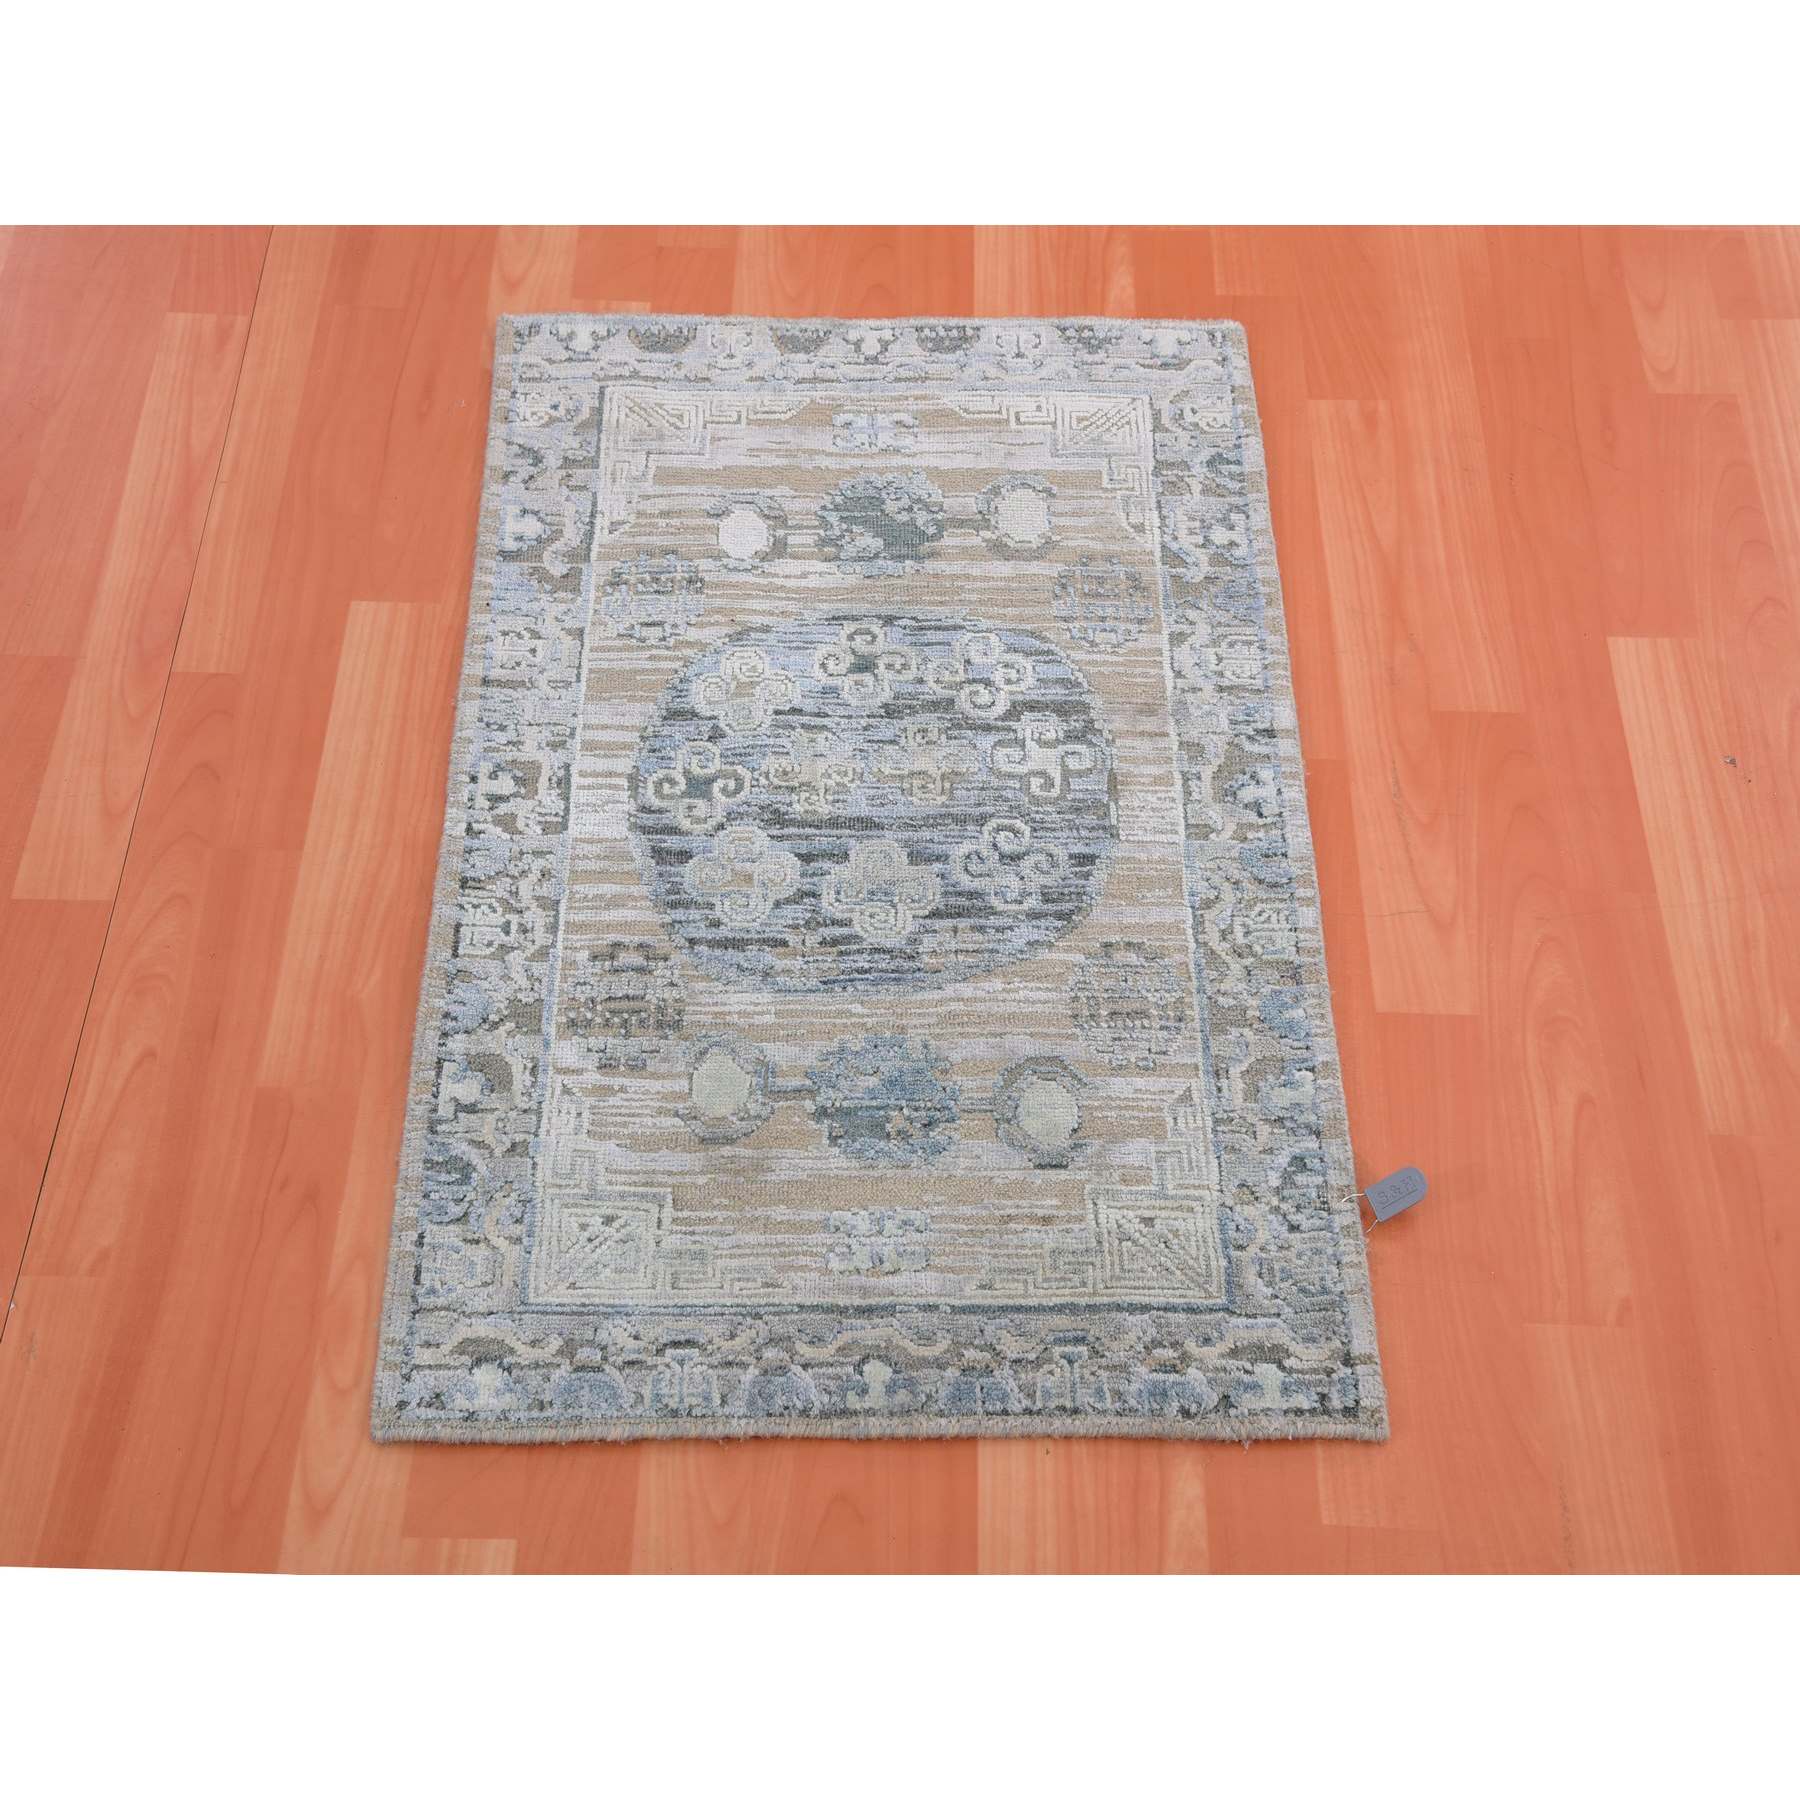 Wool-and-Silk-Hand-Knotted-Rug-377160